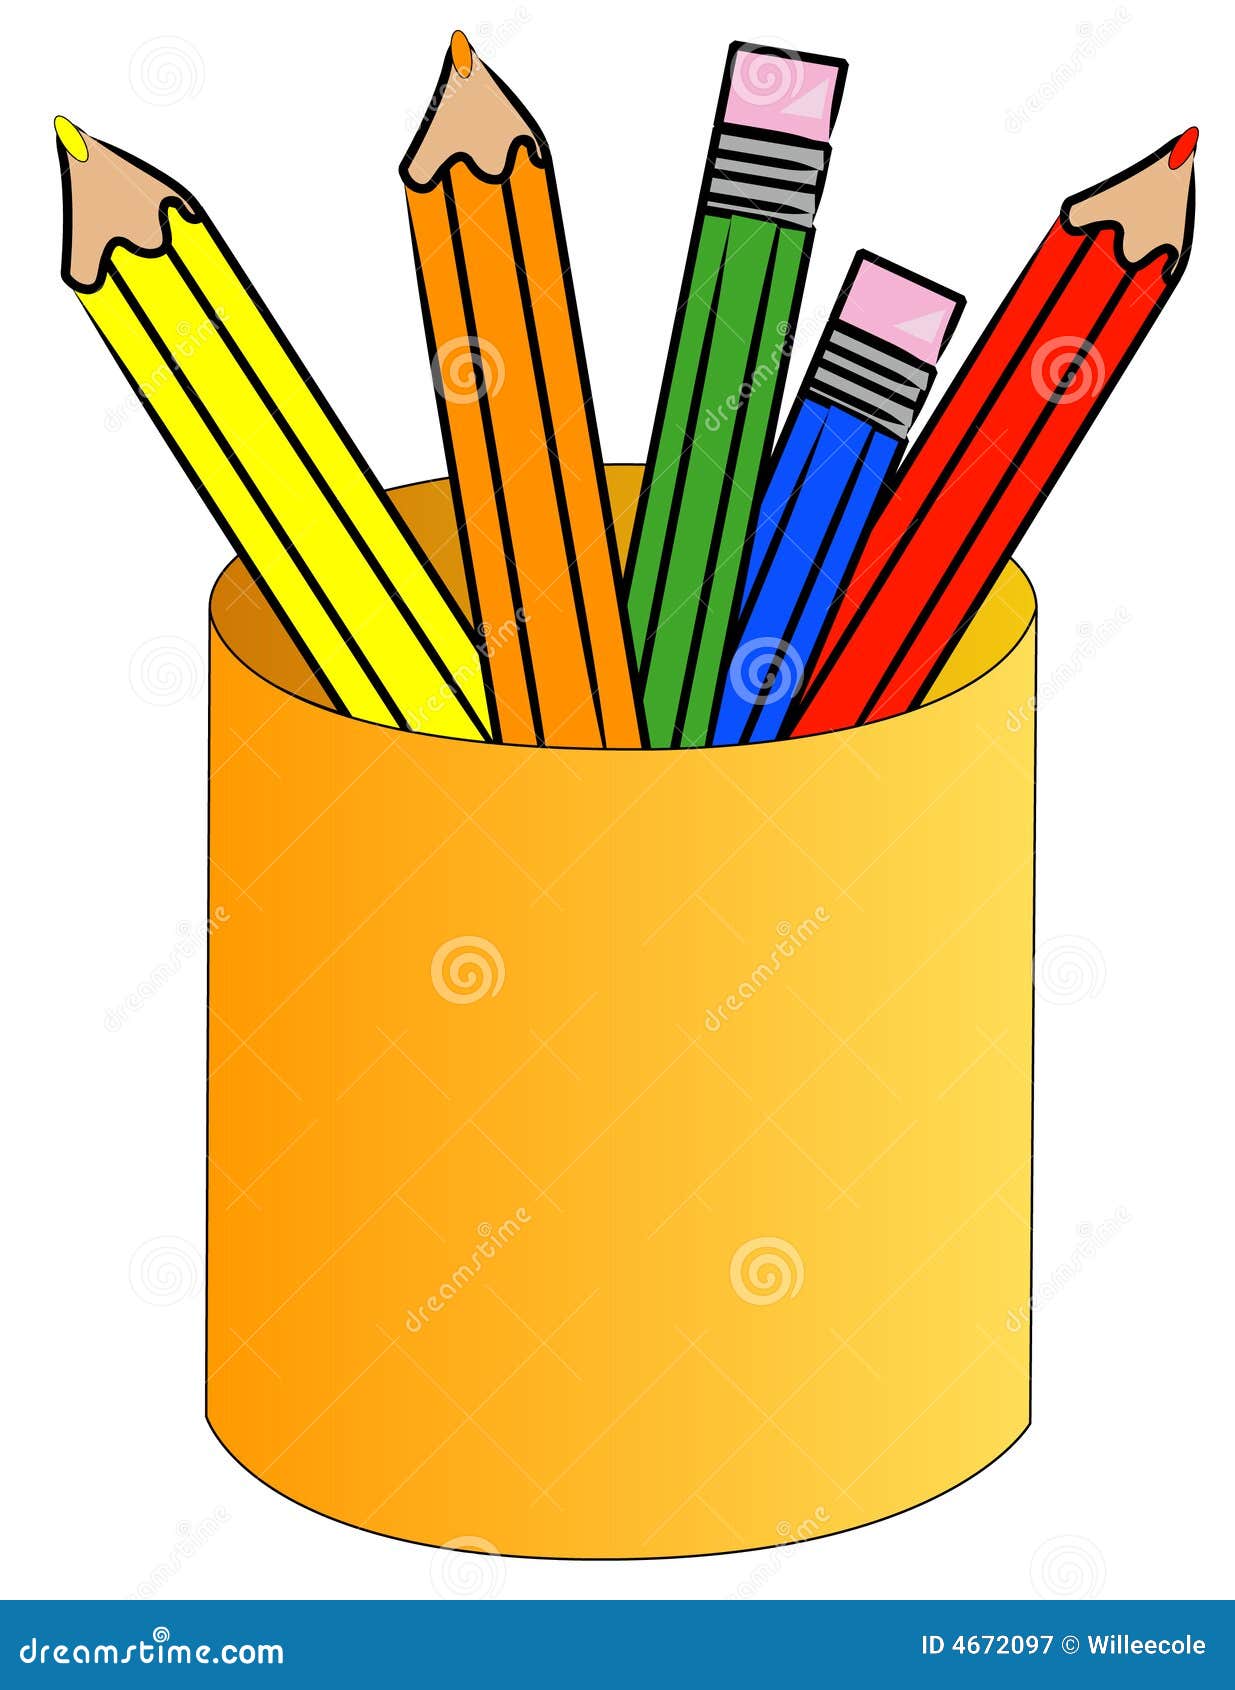 Kids Color Pencils in a Cup Free Stock Photo